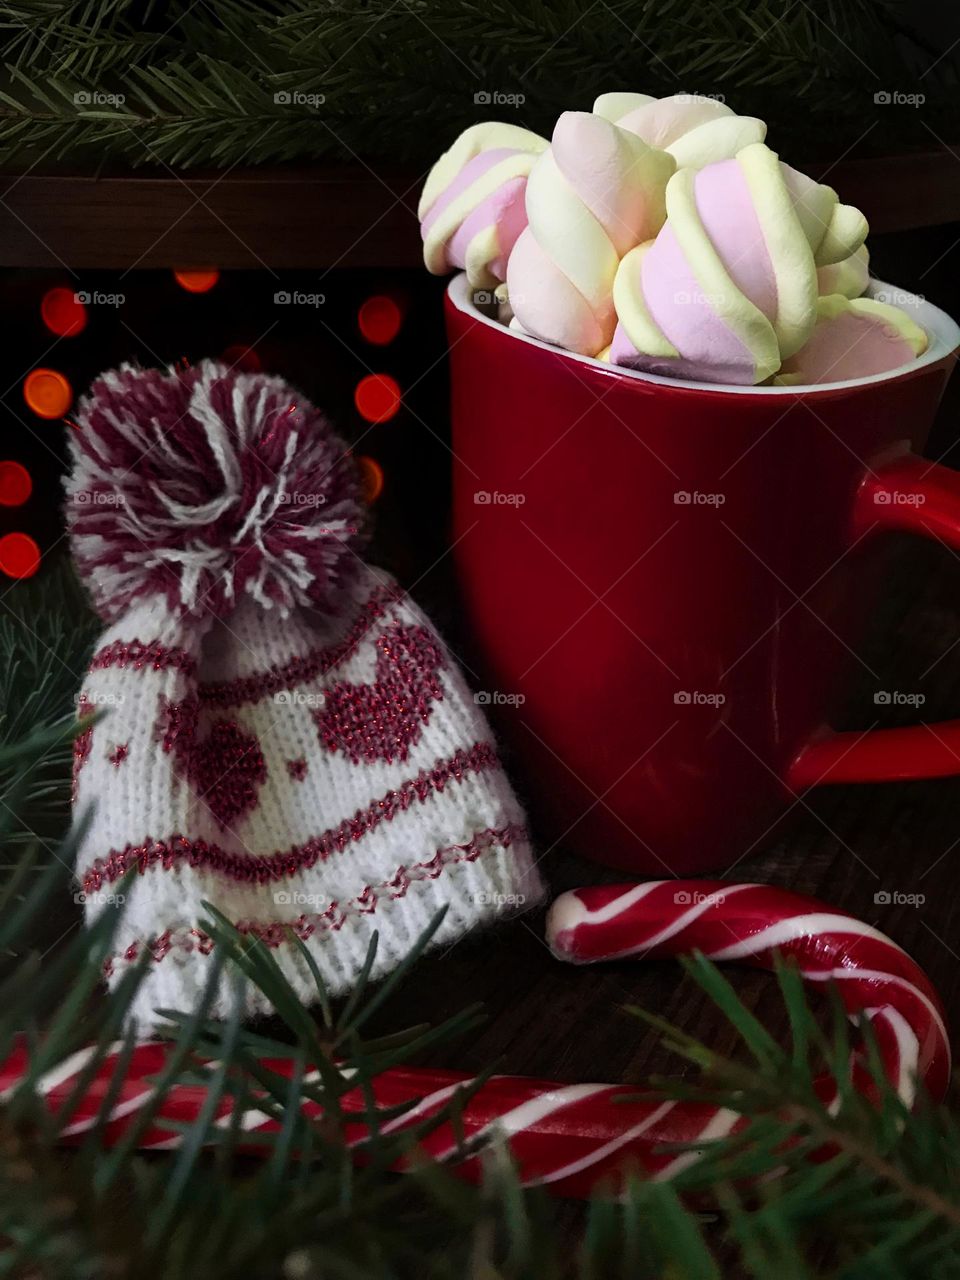 Hot cocoa with marshmallows 